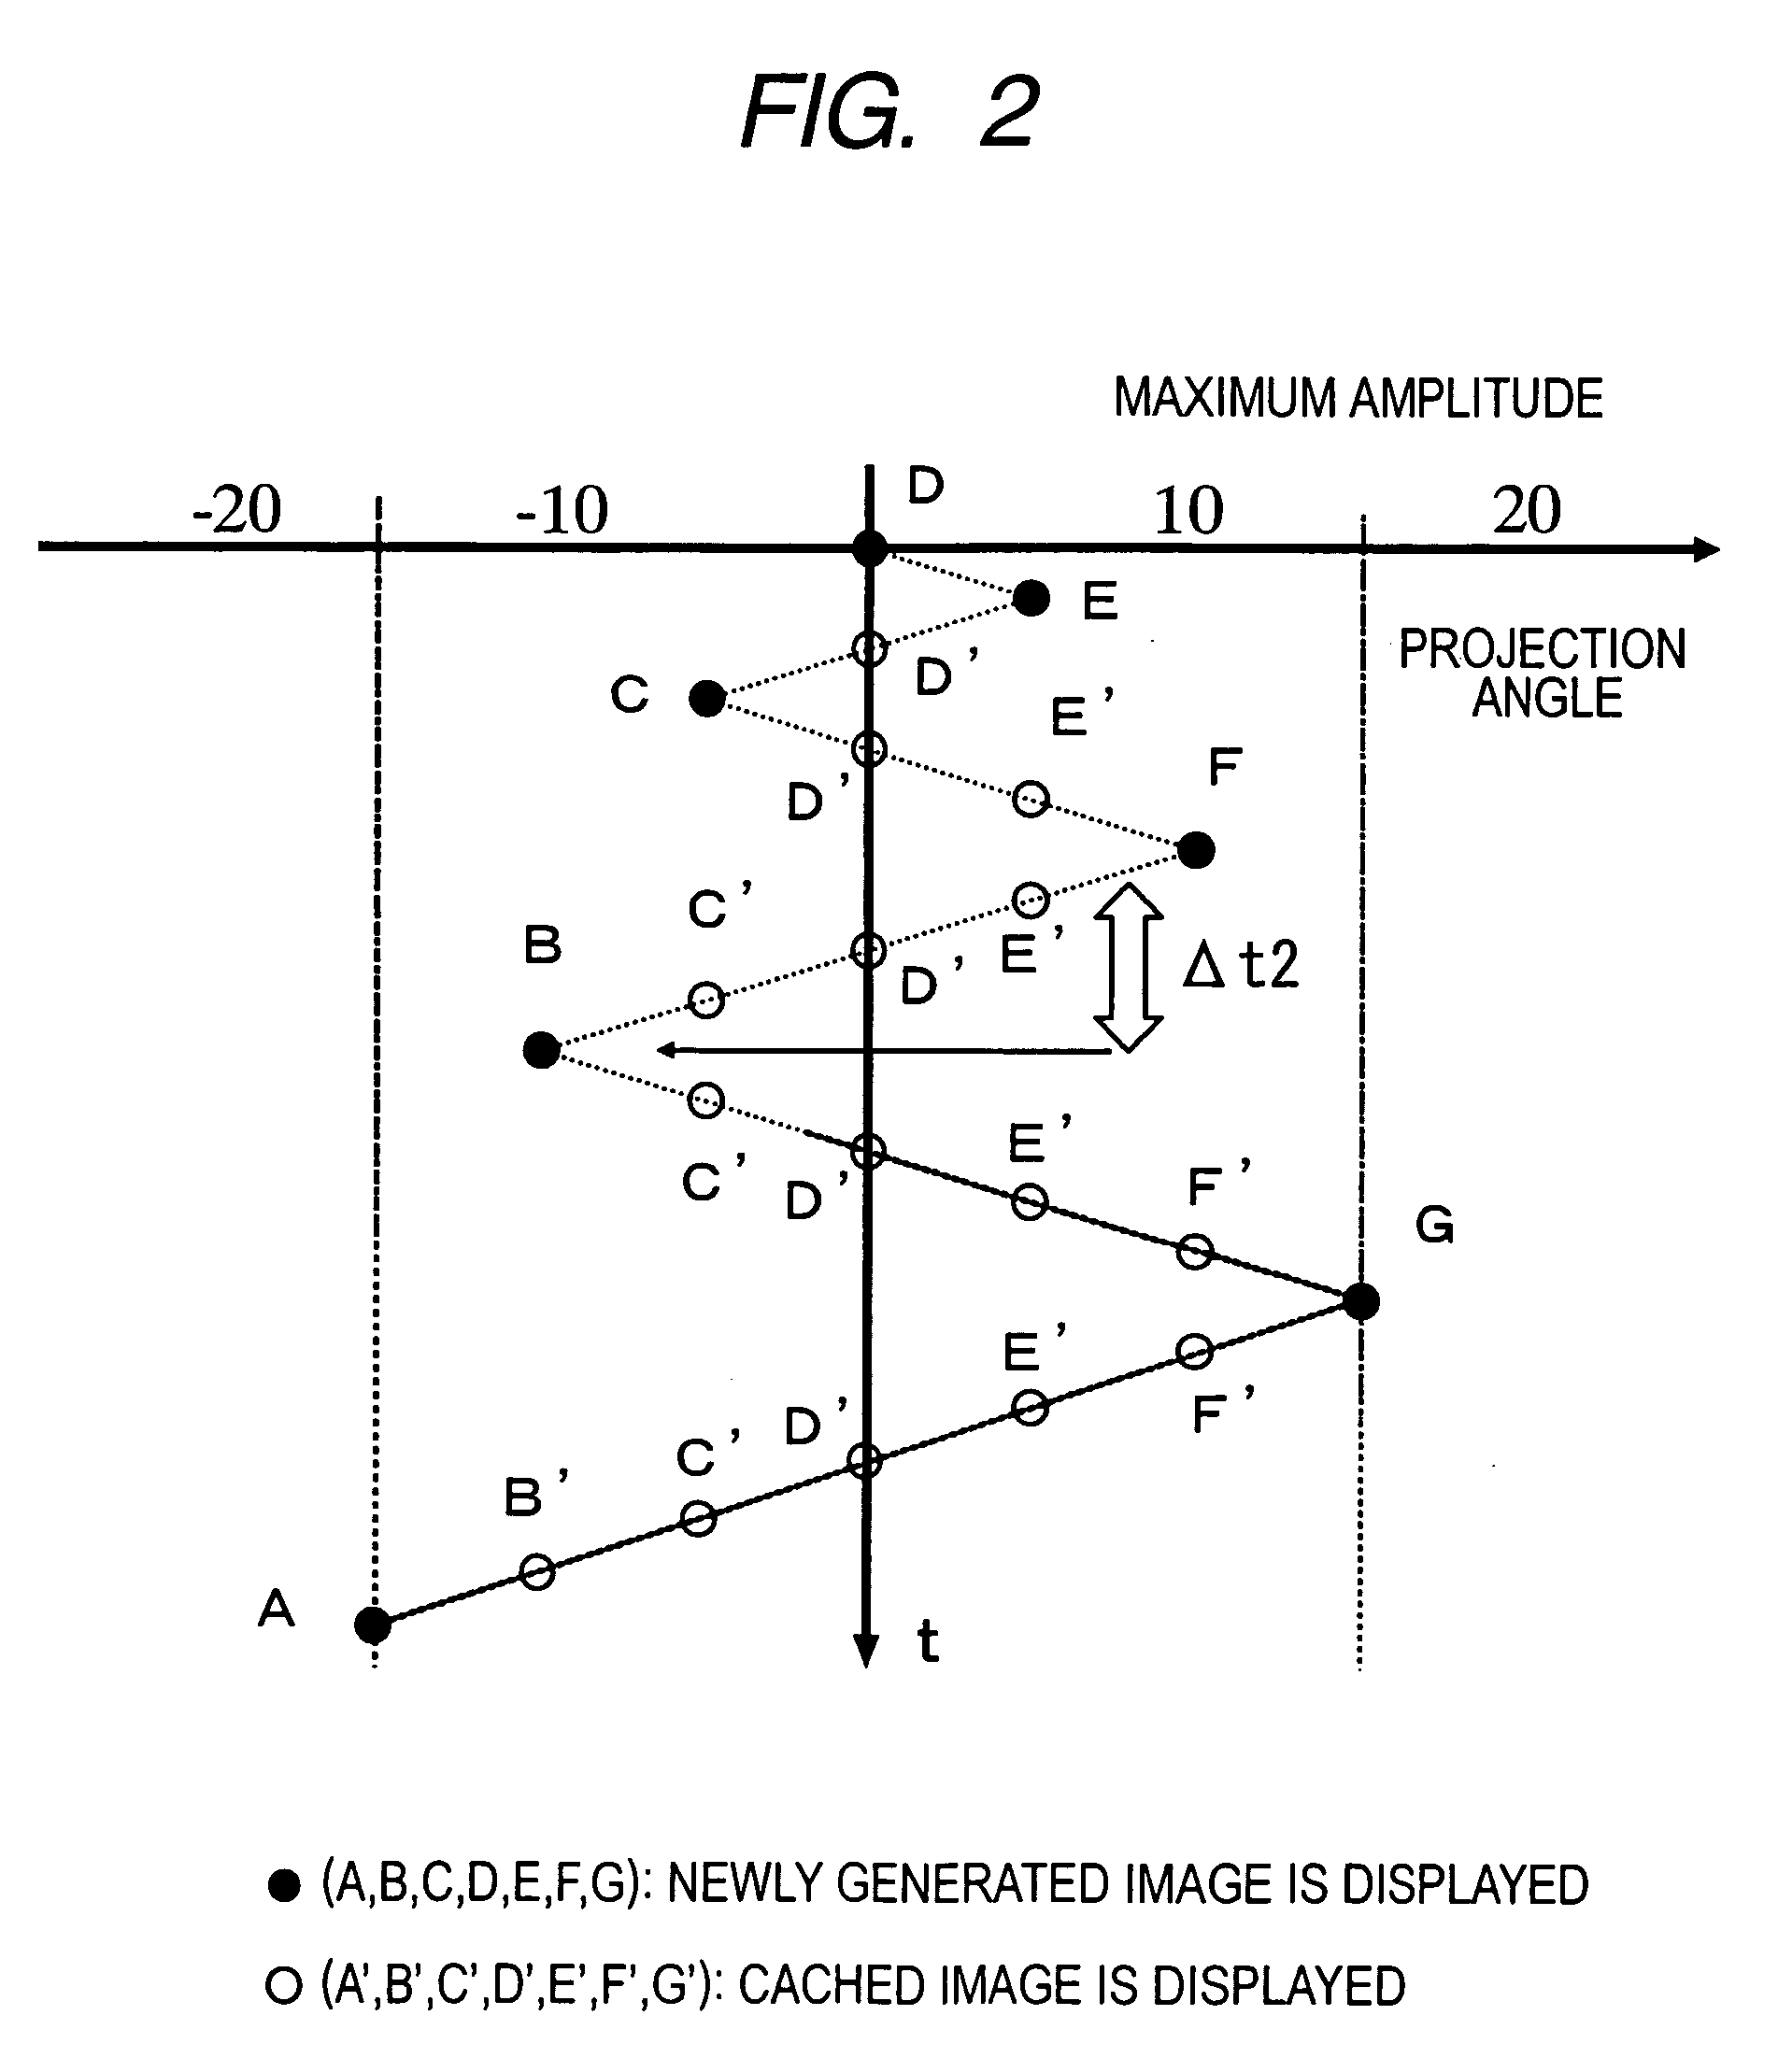 Image processing method and computer readable medium